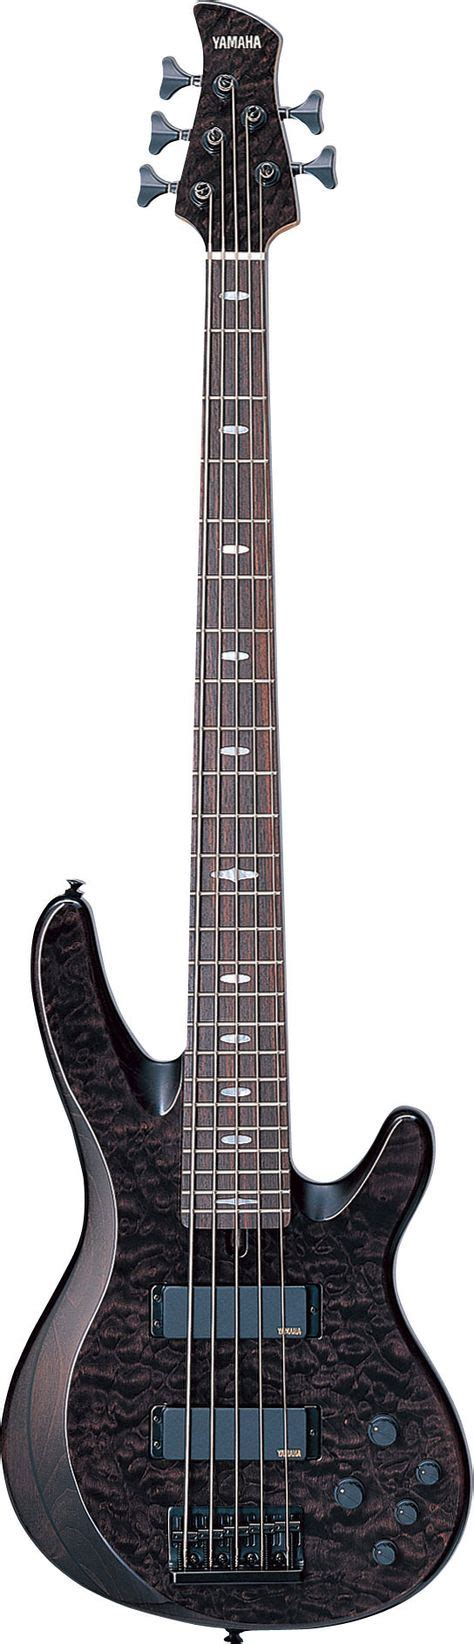 36 Best All About Dat Bass Images In 2020 Bass Electric Guitar Guitar